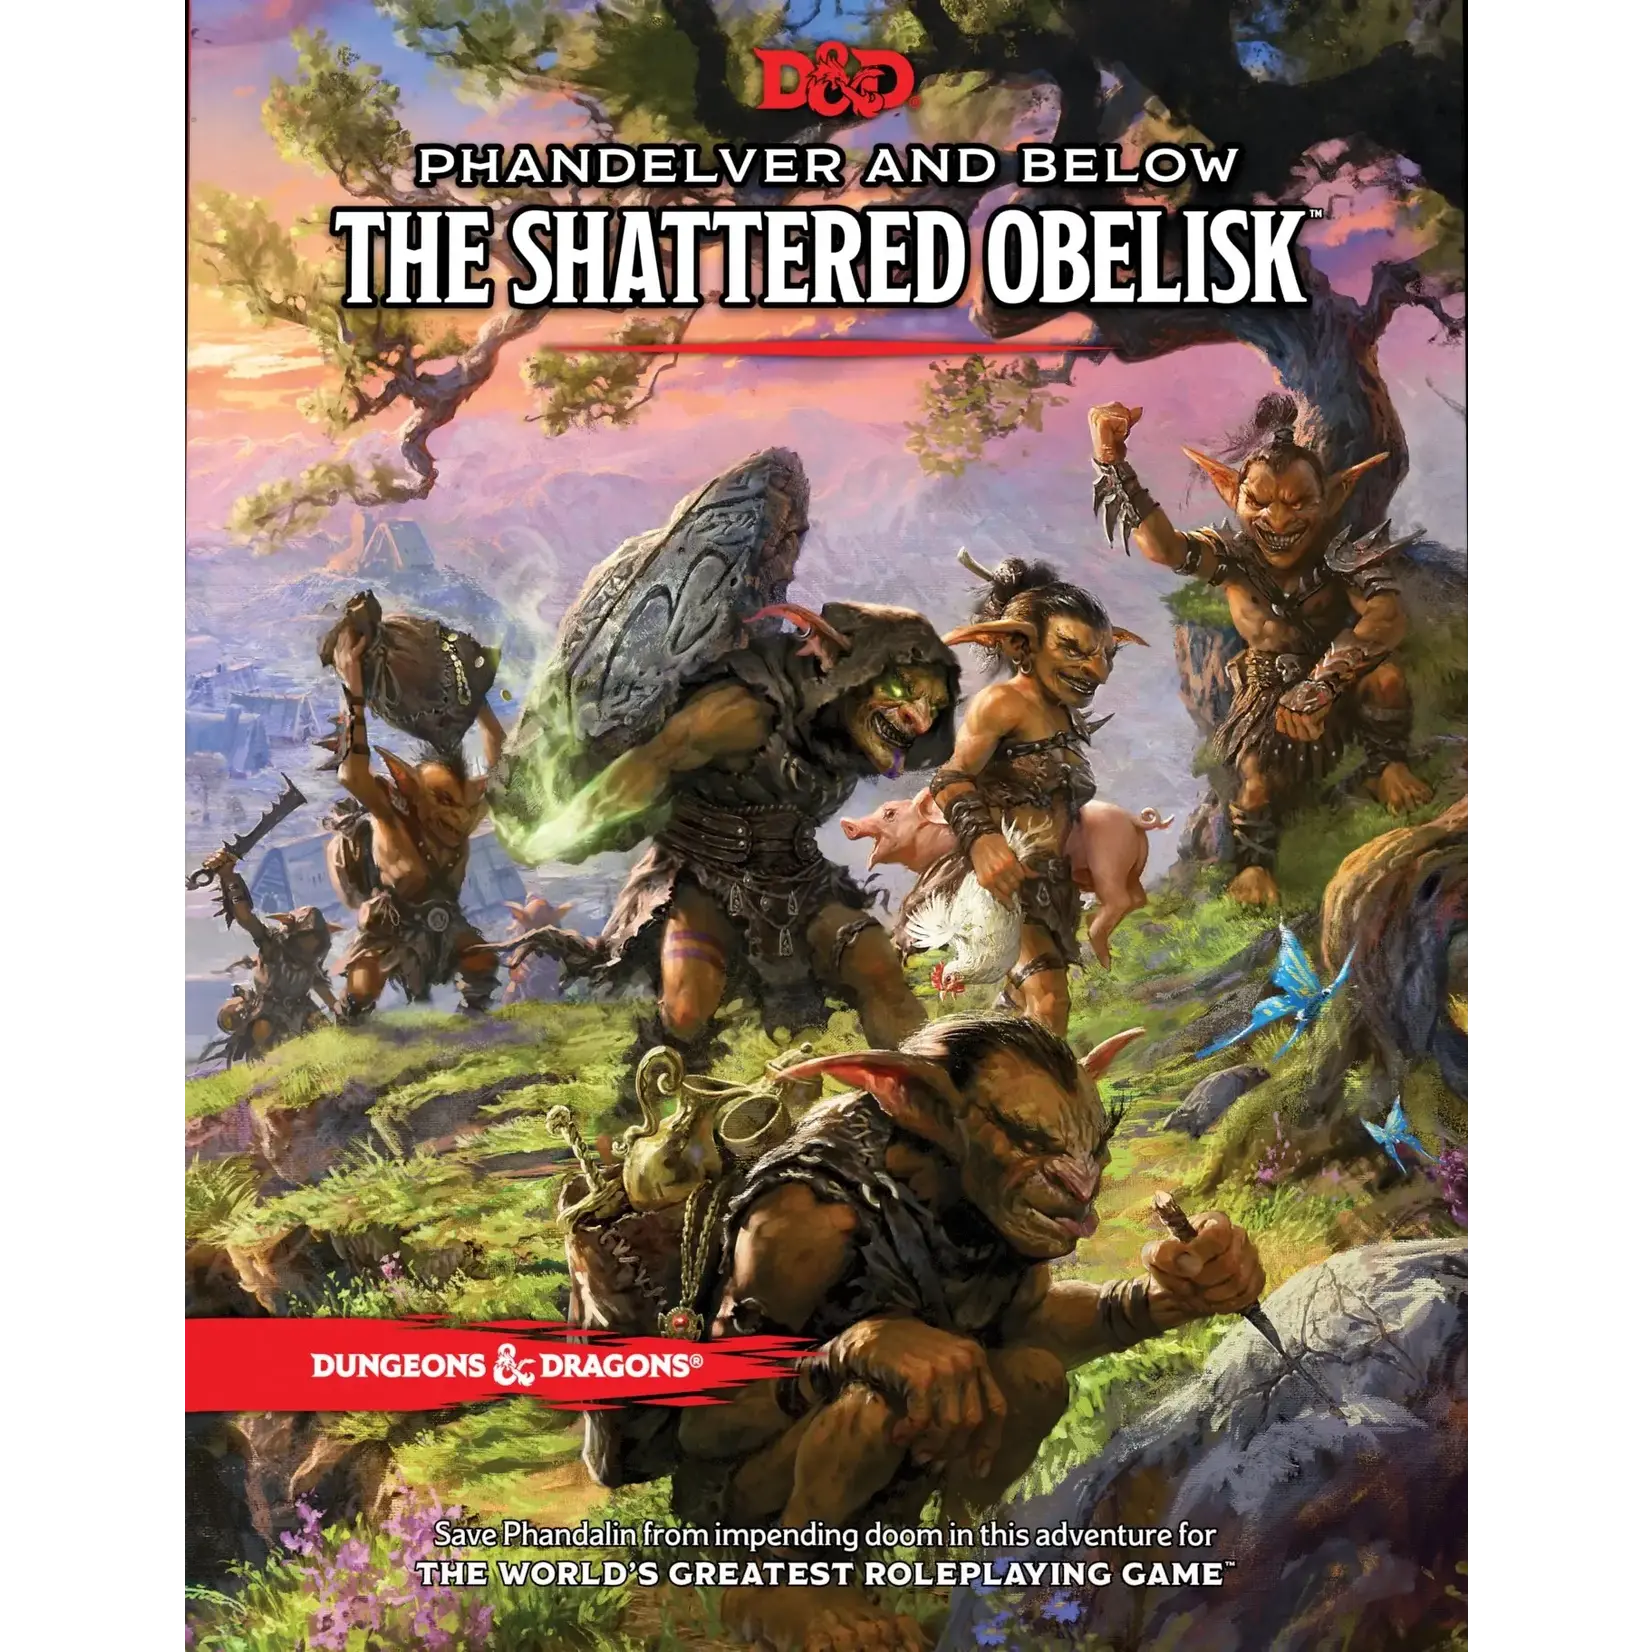 D&D 5e: Phandelver and below, the shattered obelix | Multizone: Comics And Games